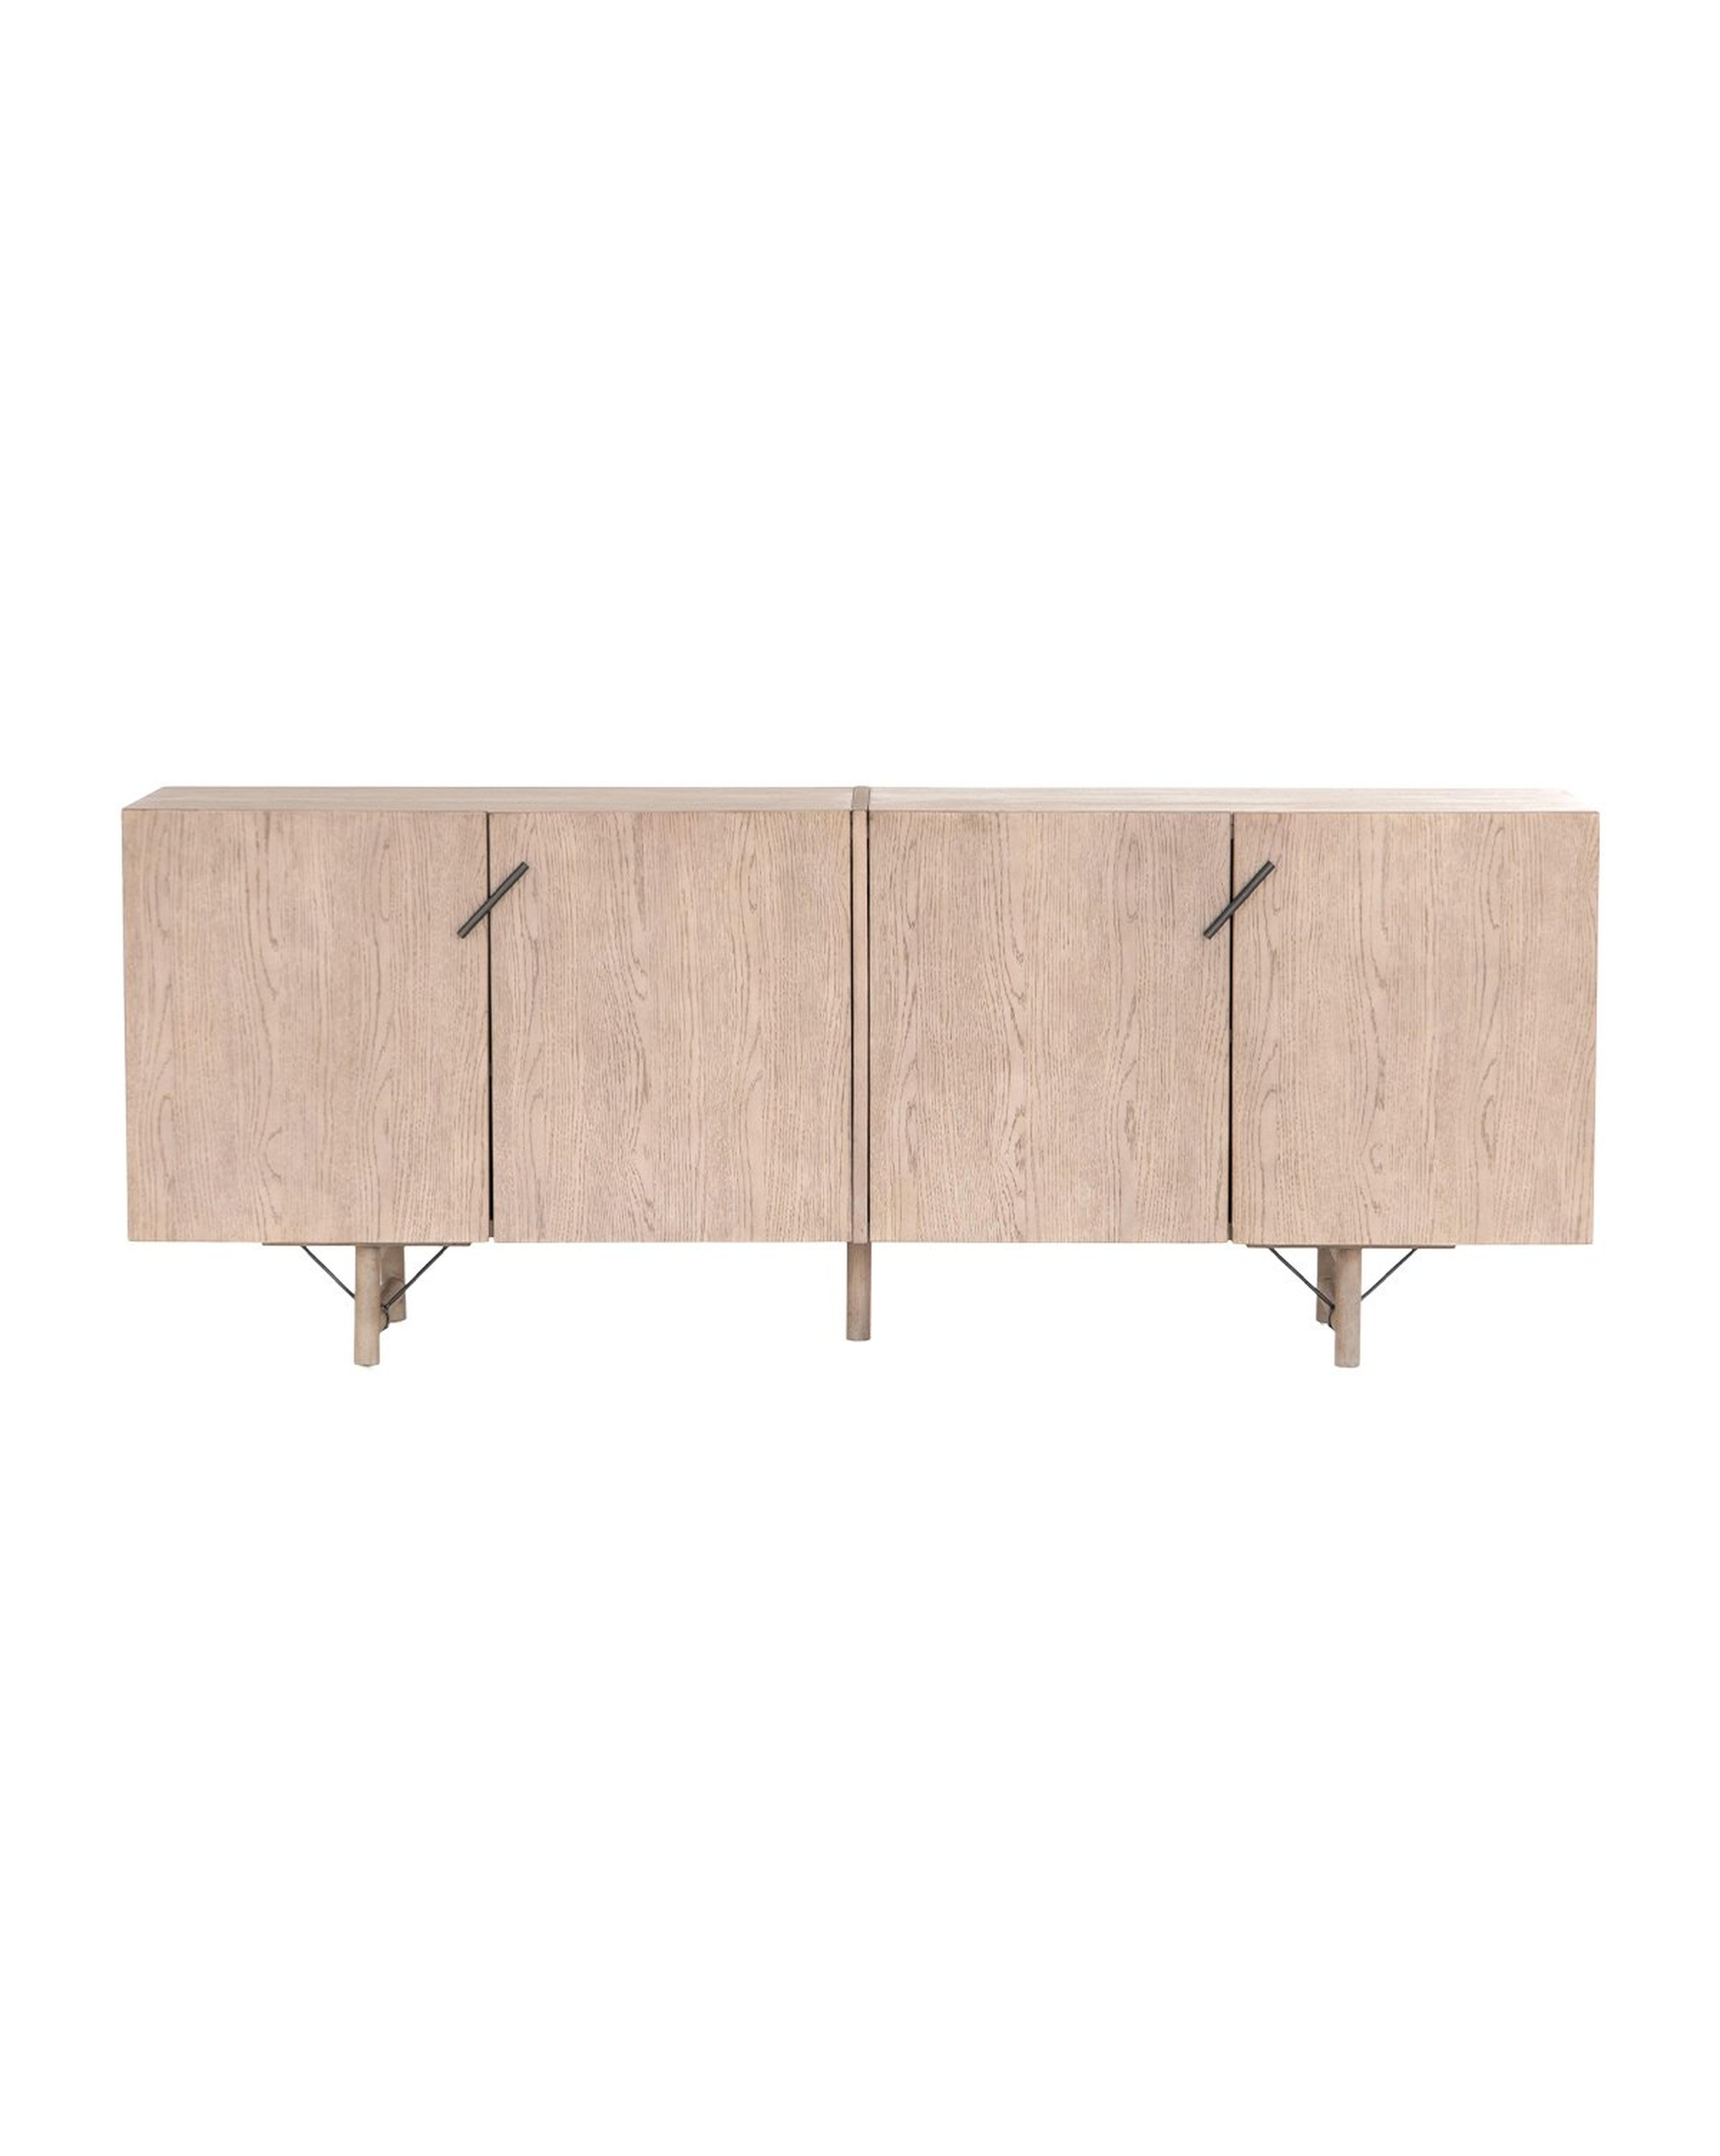 PACKHAM SIDEBOARD - McGee & Co.